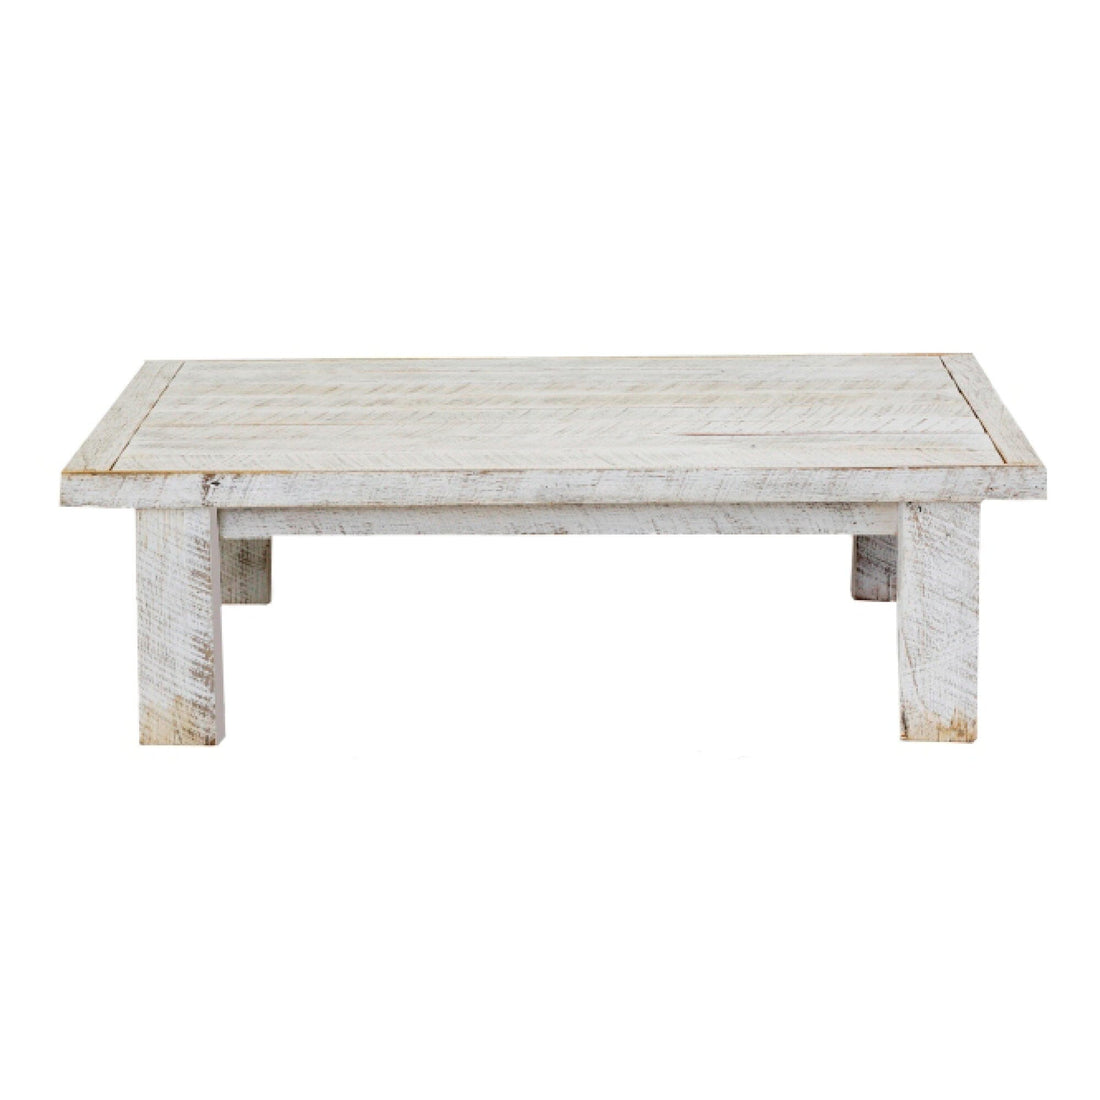 Locally Made Outdoor Coffee Table L1200mm Outdoor Furniture Beachwood Designs 